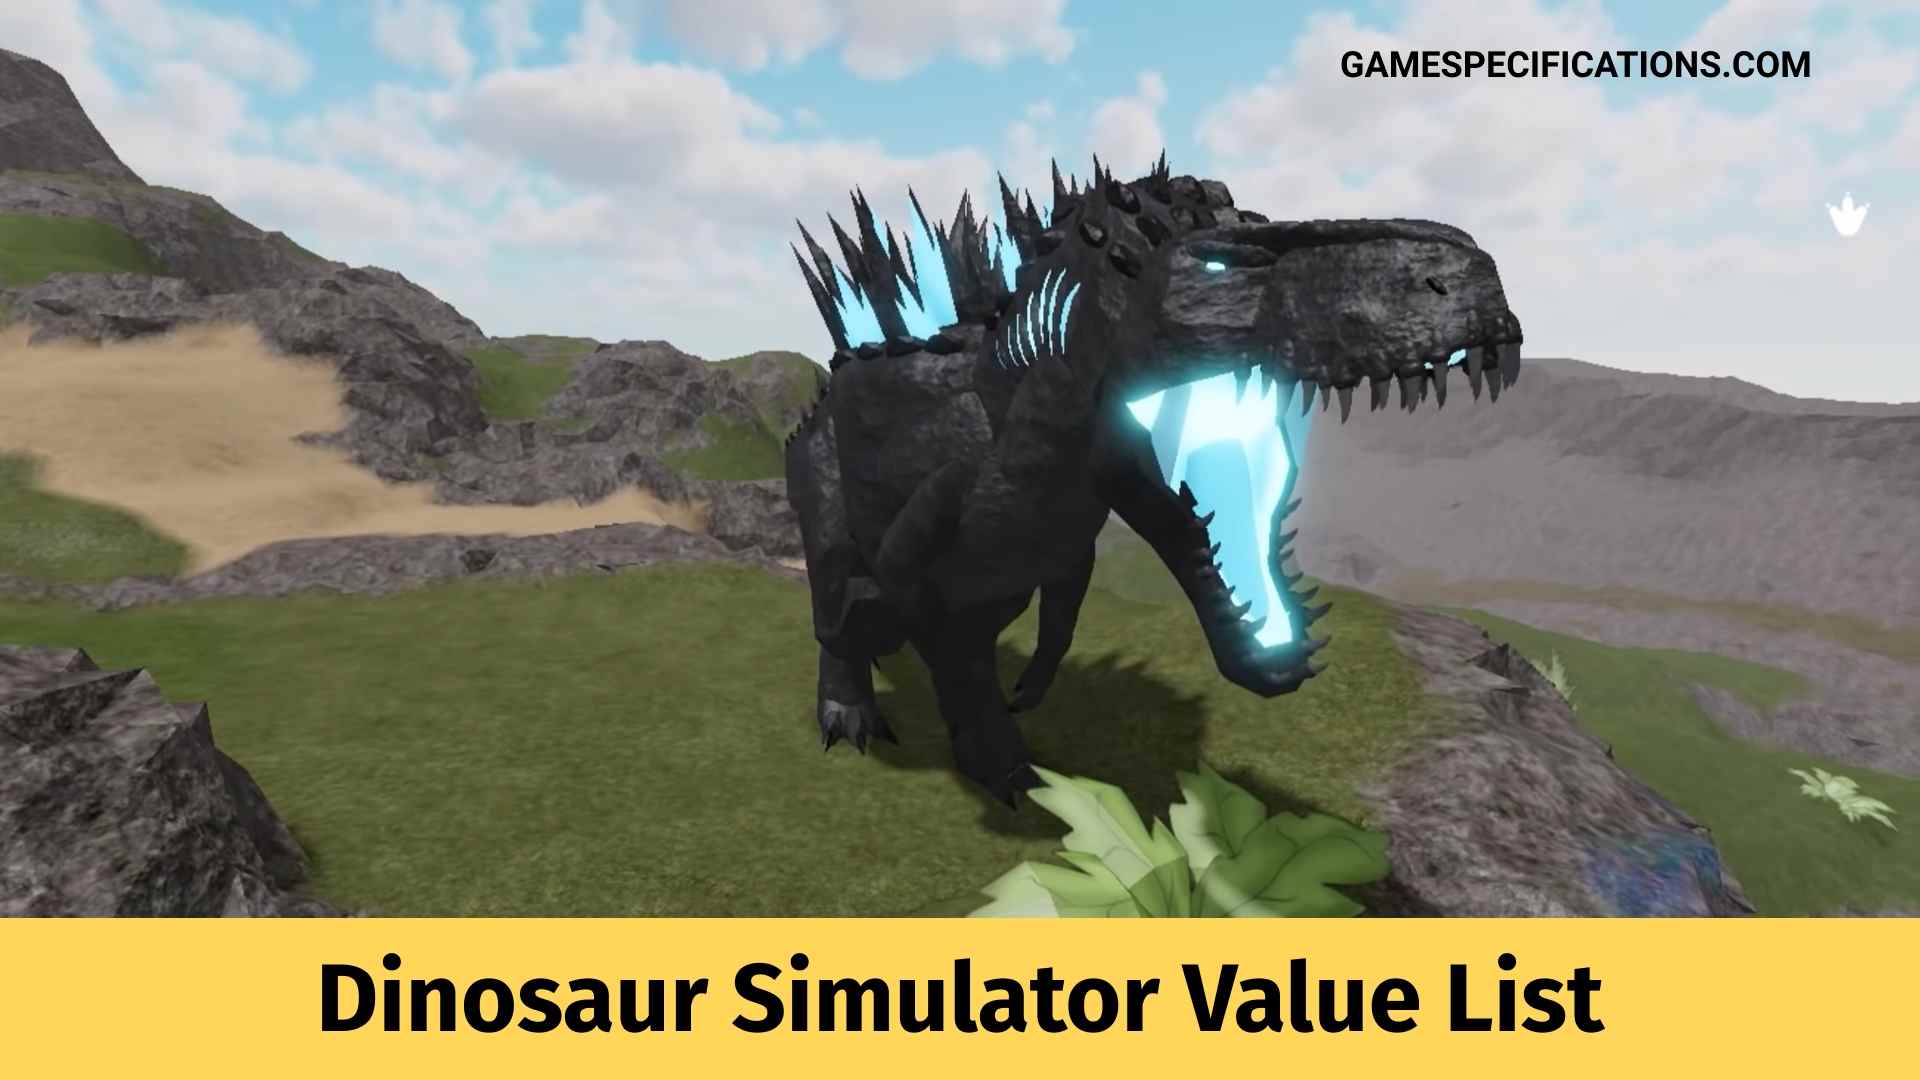 Roblox Dinosaur Simulator Value List For All Tiers 2021 Game Specifications - how to get kaiju baryonix in dinosaur simulator on roblox